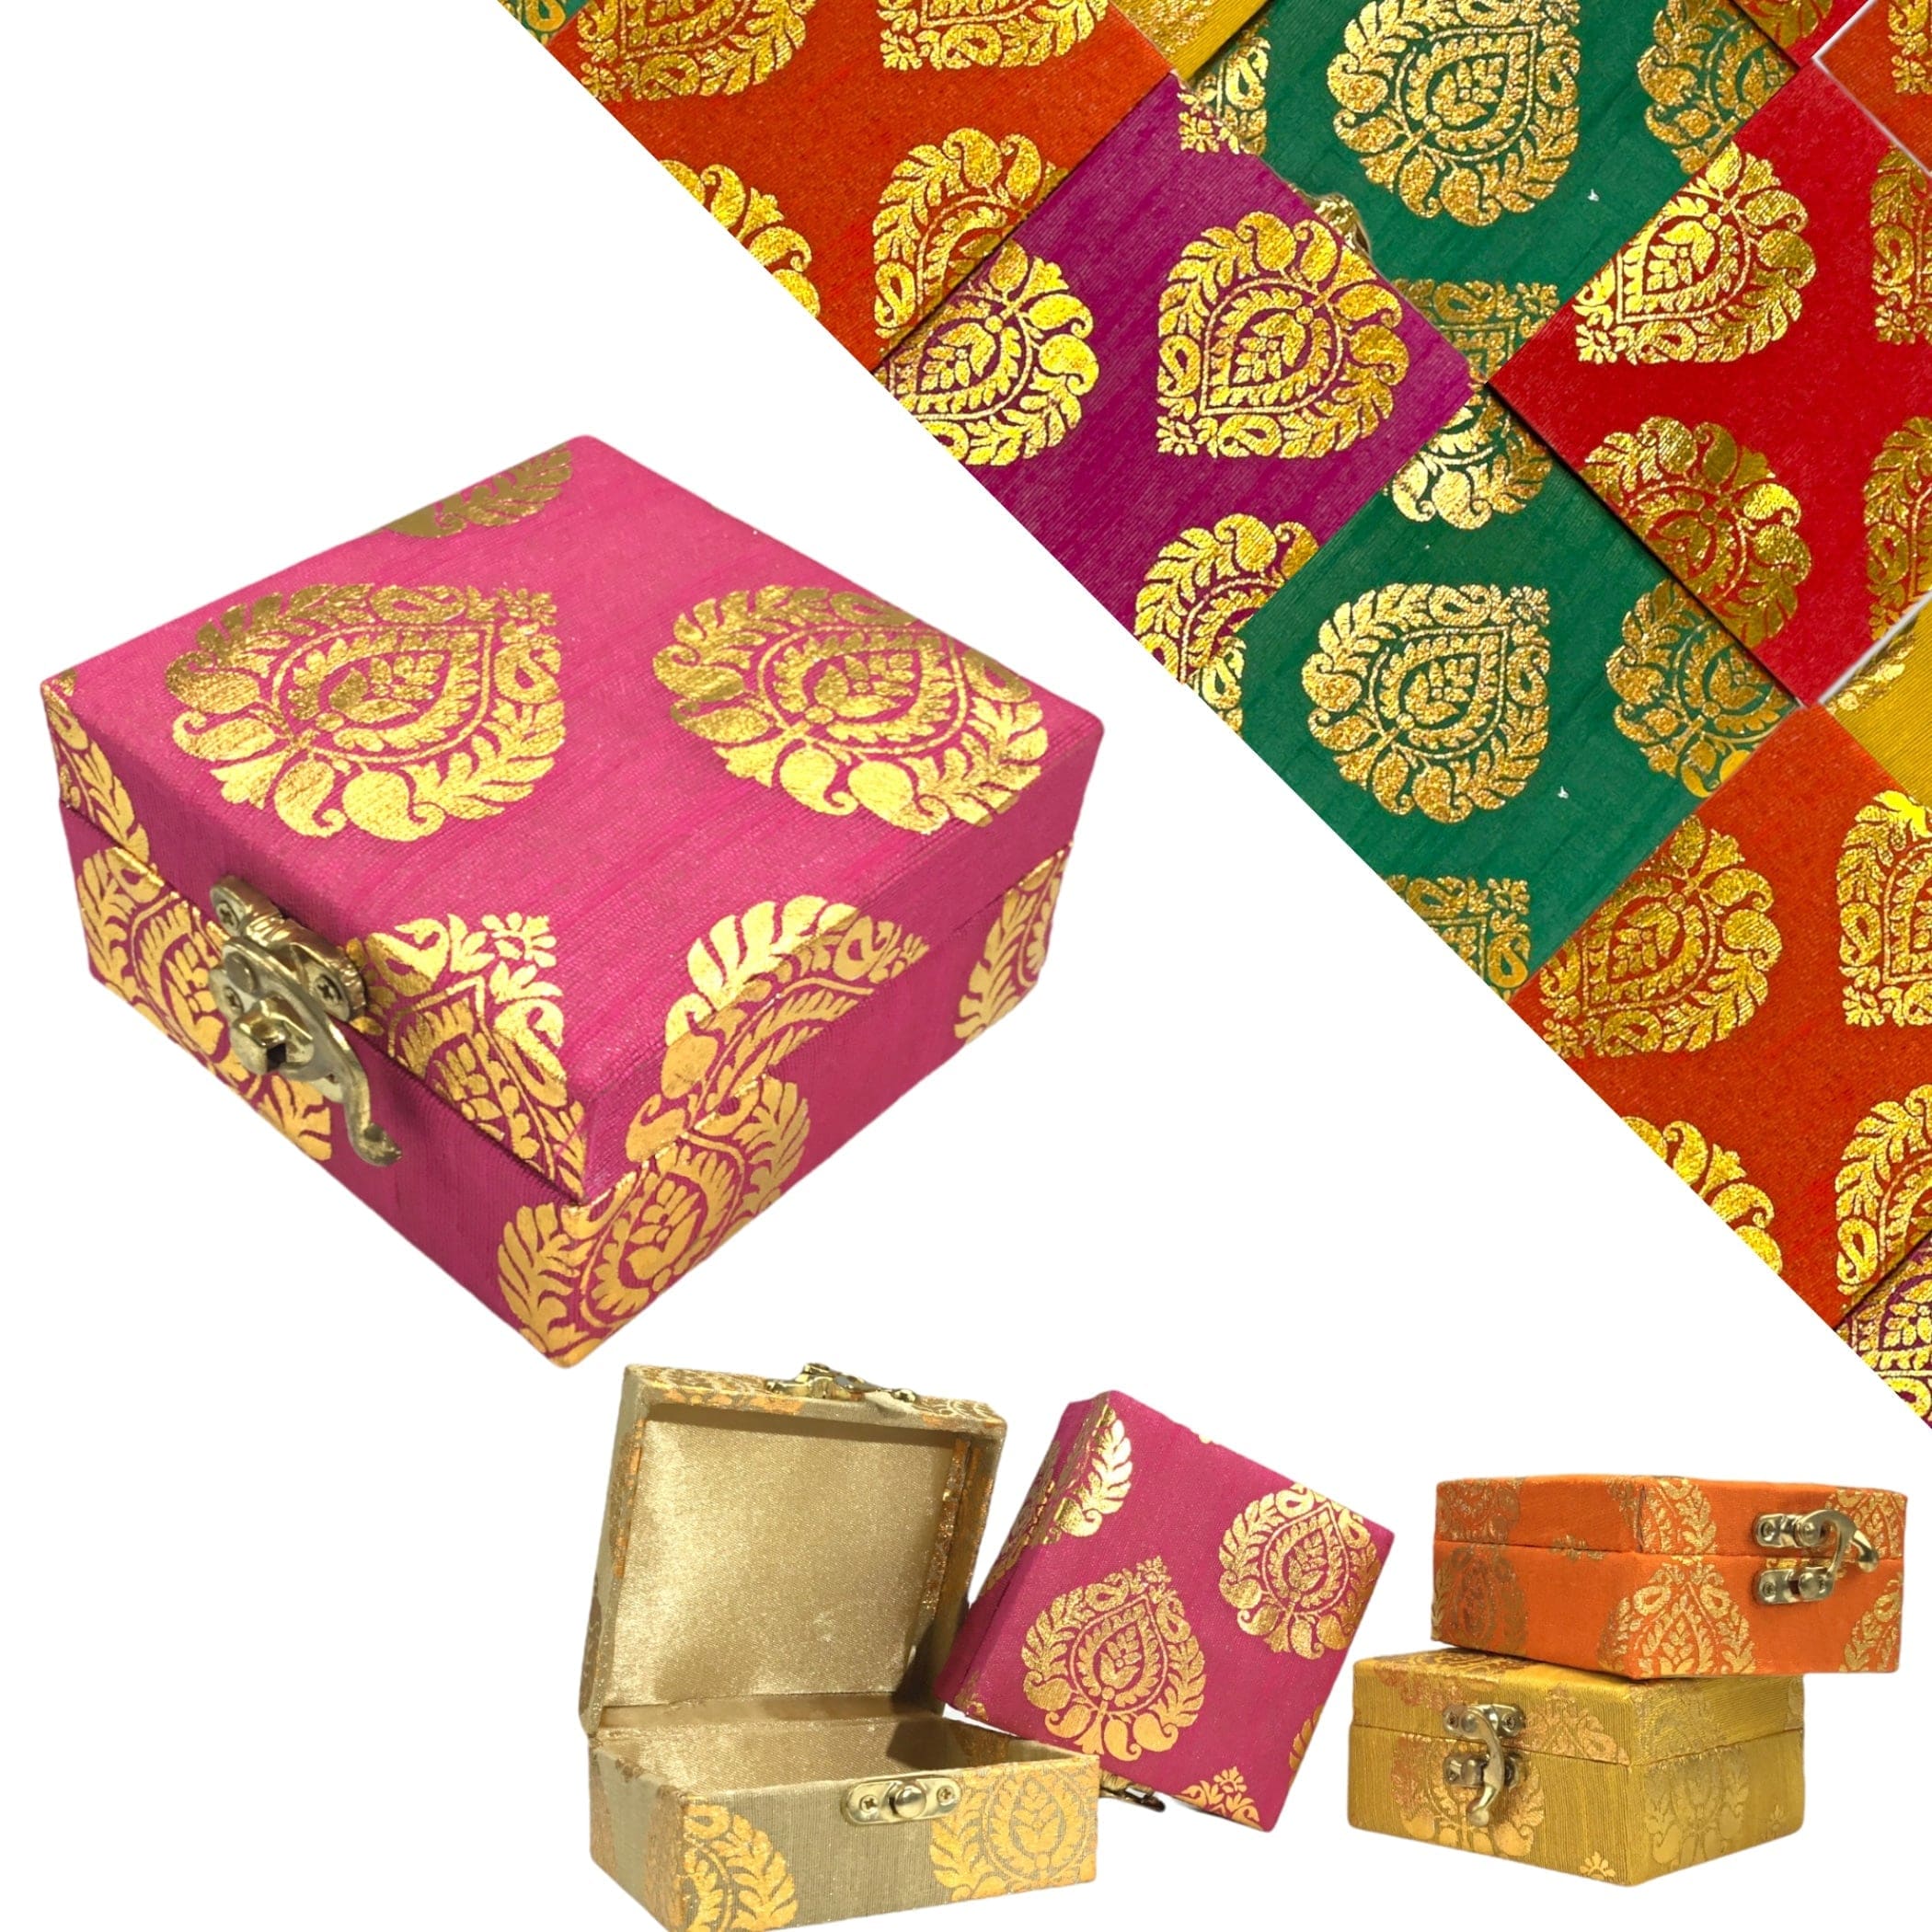 Small Handmade Jewelry Box Brocade Gift Boxes Favor